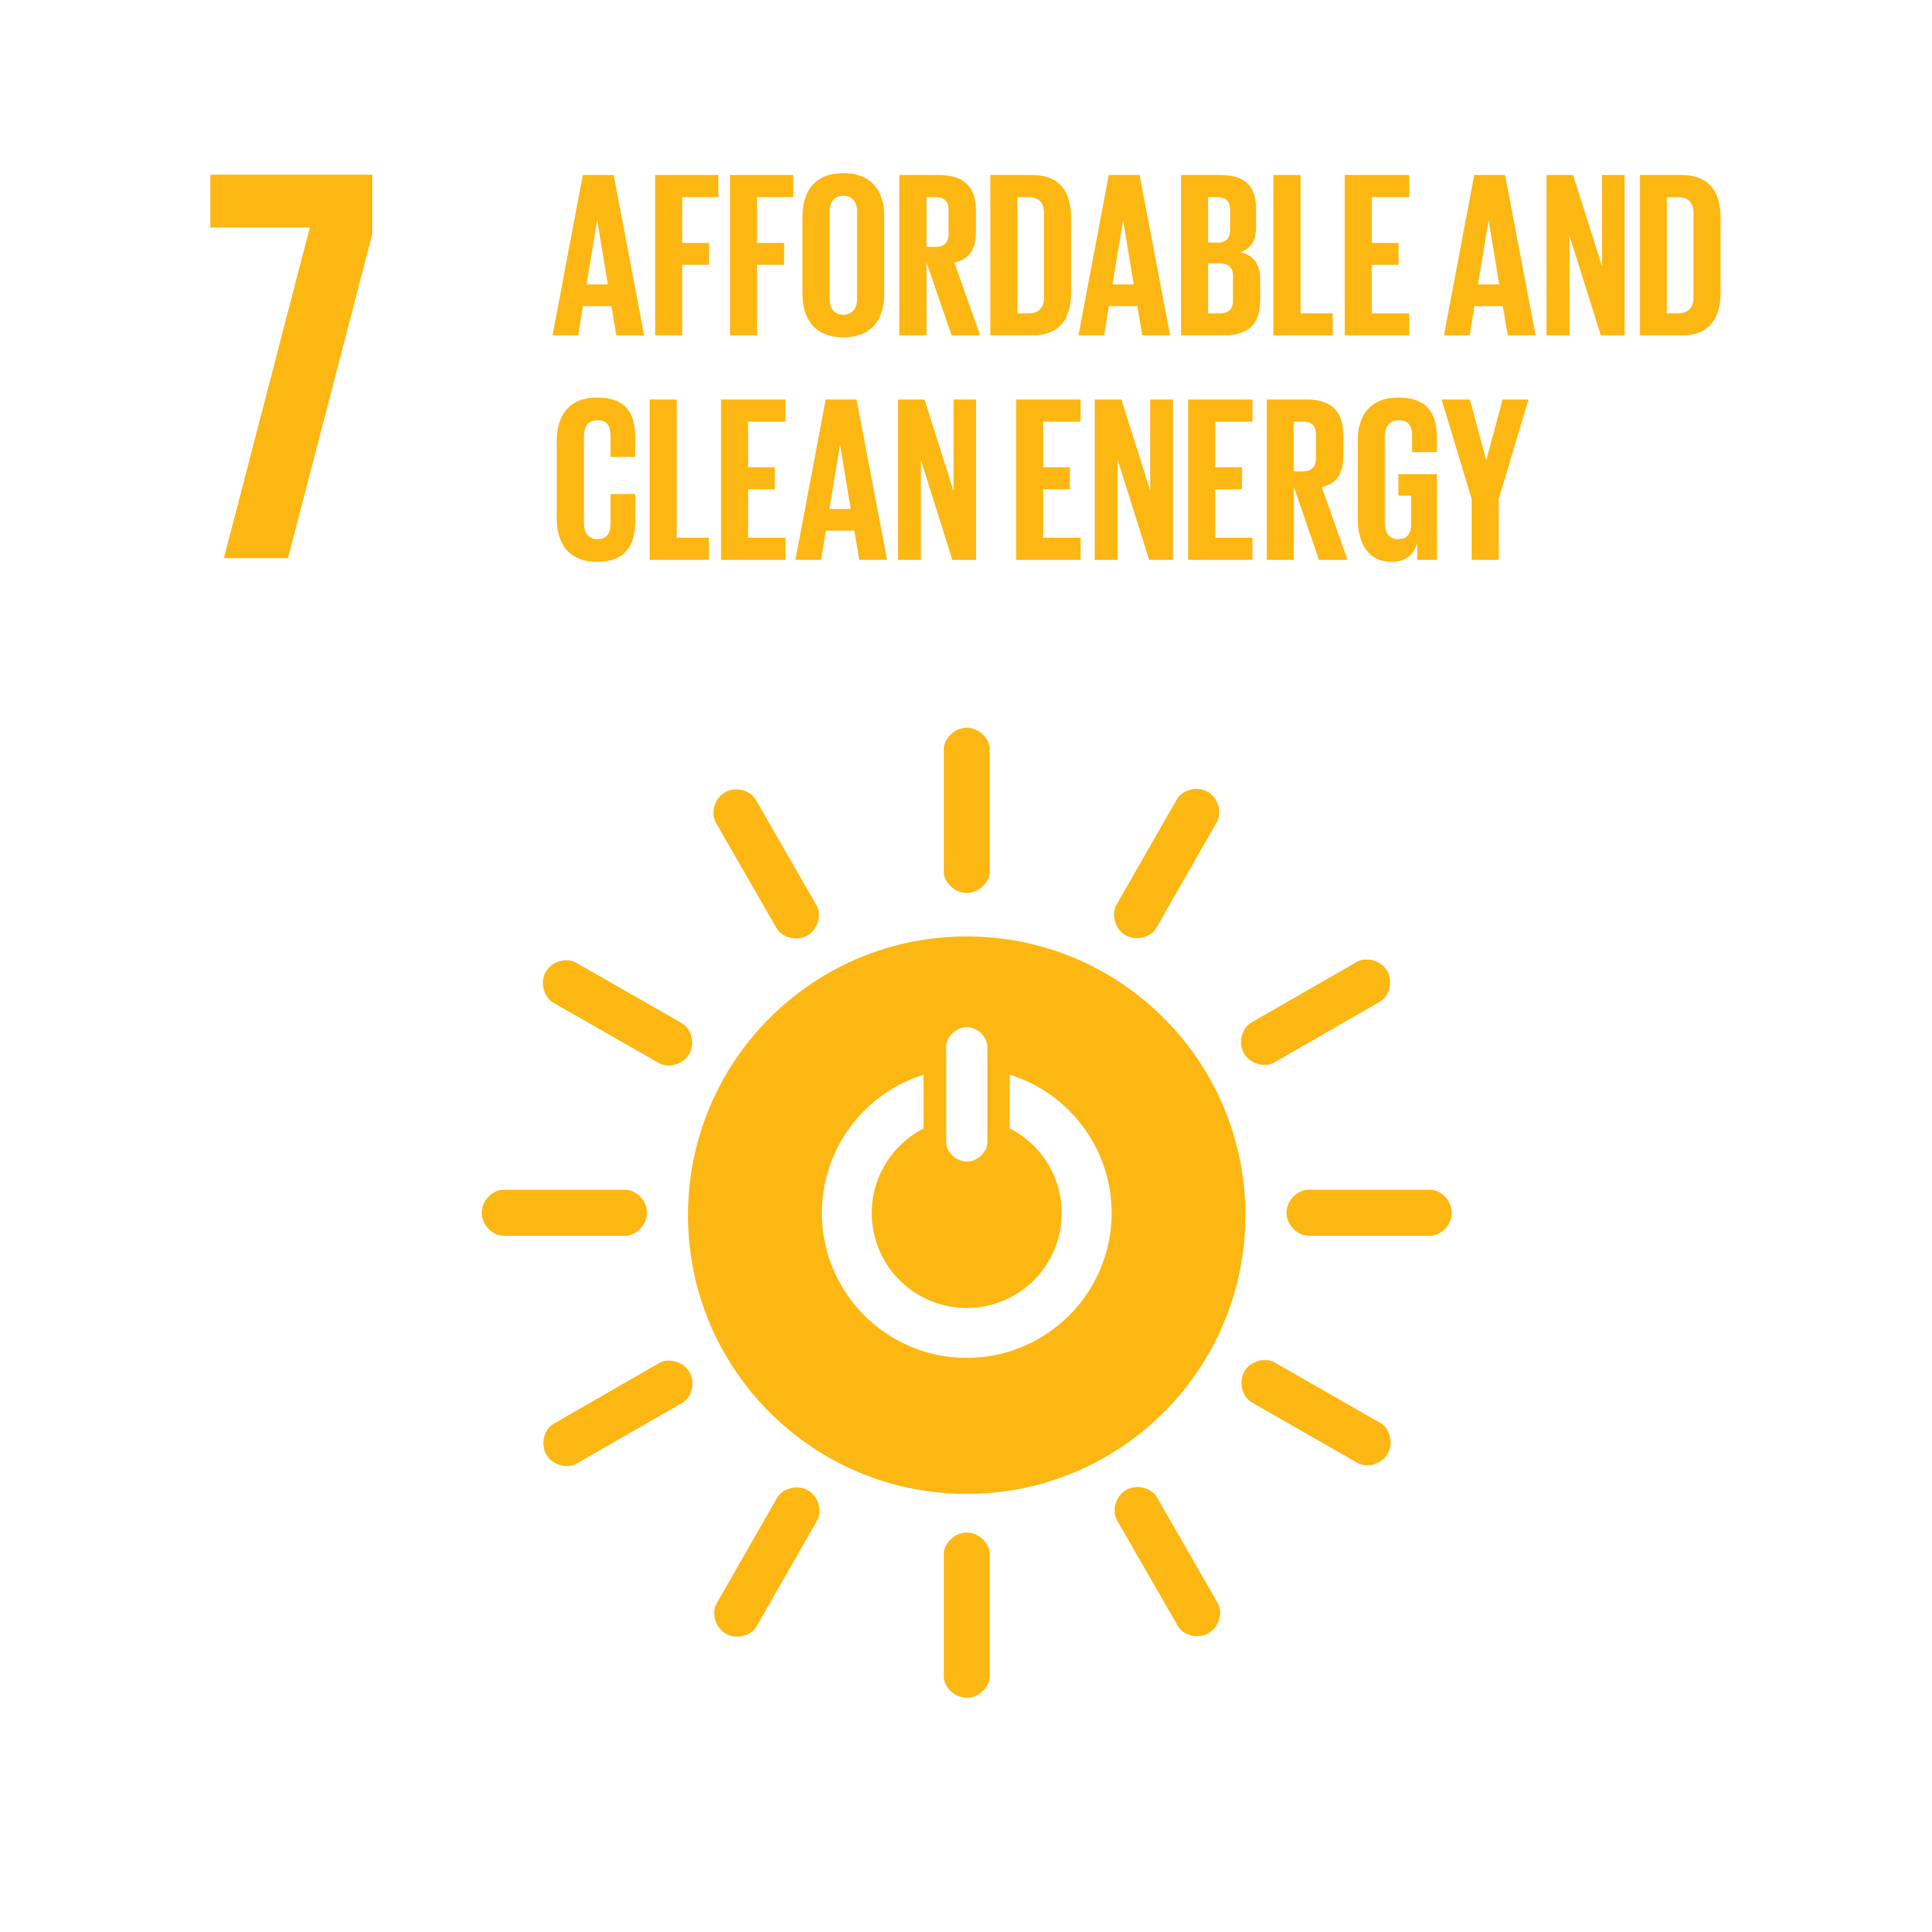 SDG 7 - Affordable and clean energy